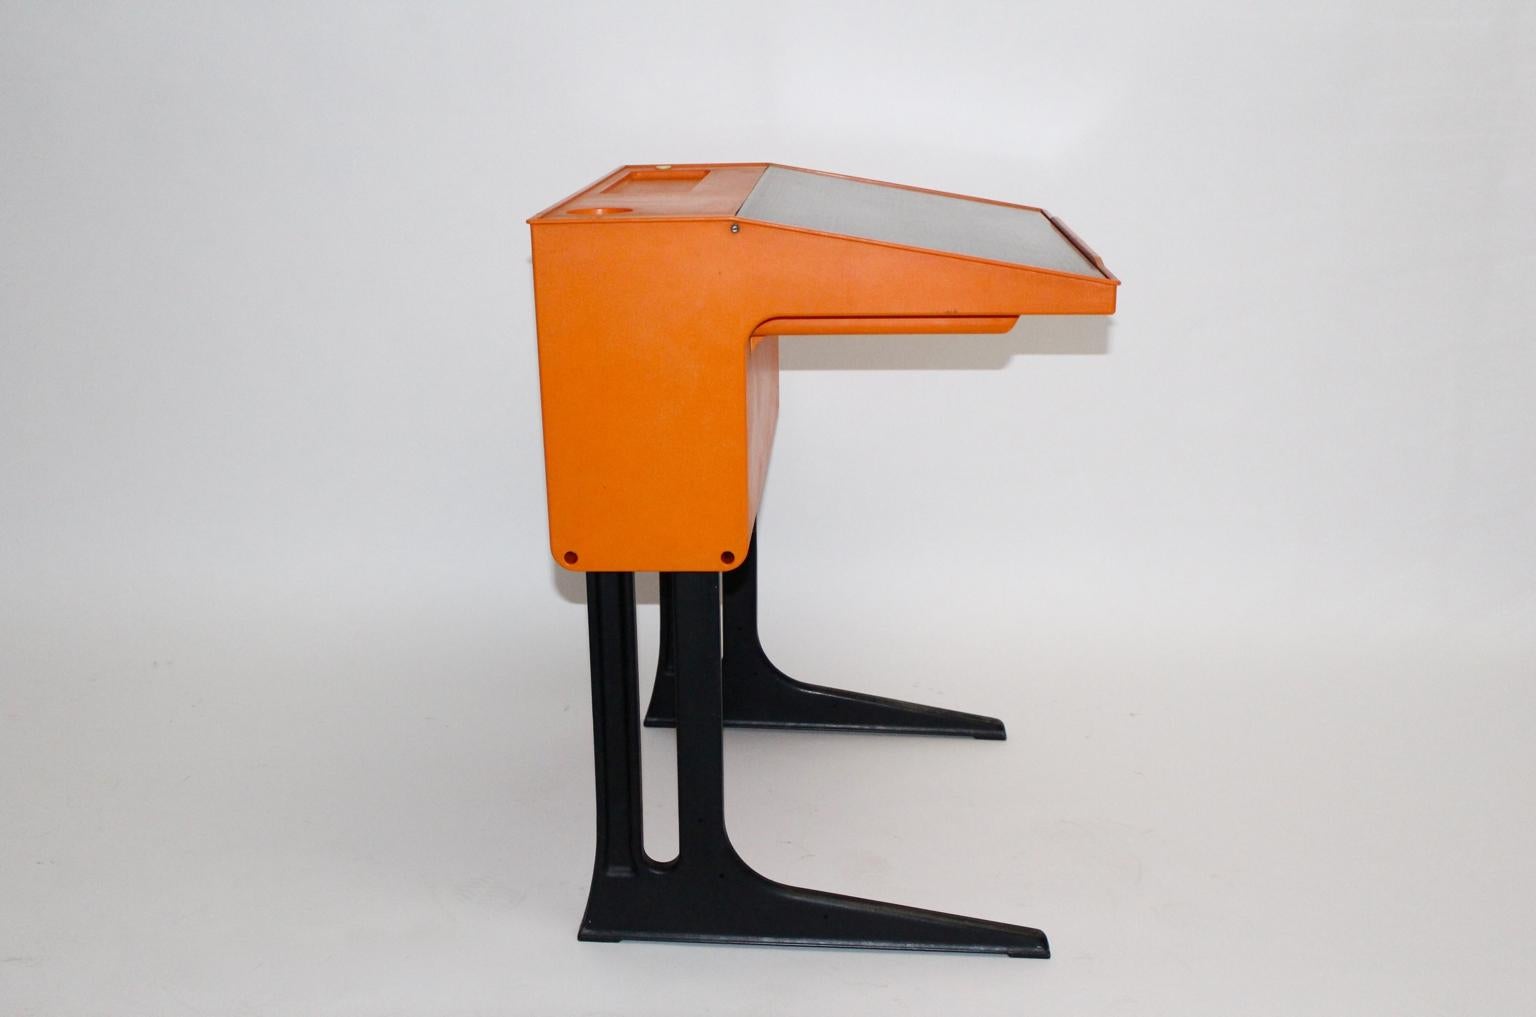 Space Age orange vintage desk designed by Luigi Colani for Flötotto, Germany, circa 1970.
While the body shows a bold orange color tone, the writing flap is brown.
Possible to use as a writing desk for children and for adults, the desk is adjustable